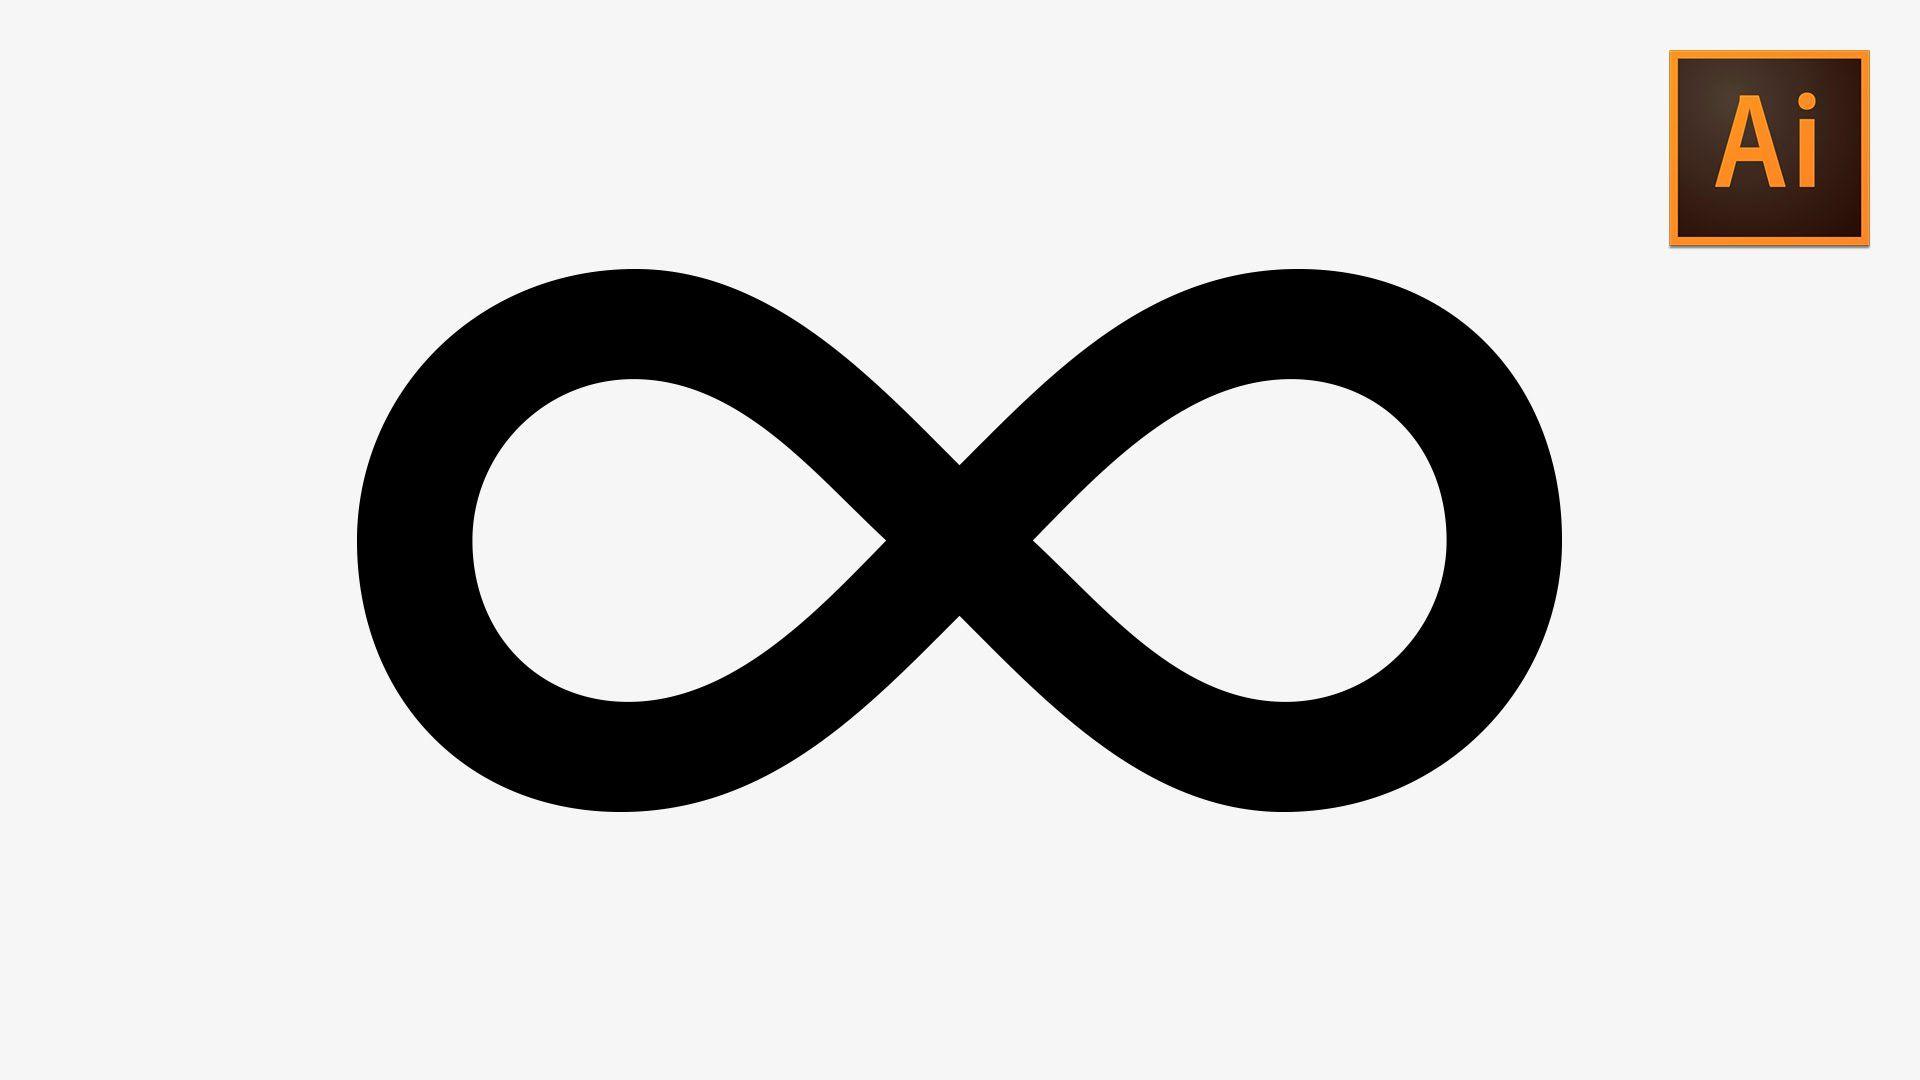 Infinity Logo - Learn How to Quickly Create an Infinity Symbol in Adobe Illustrator ...